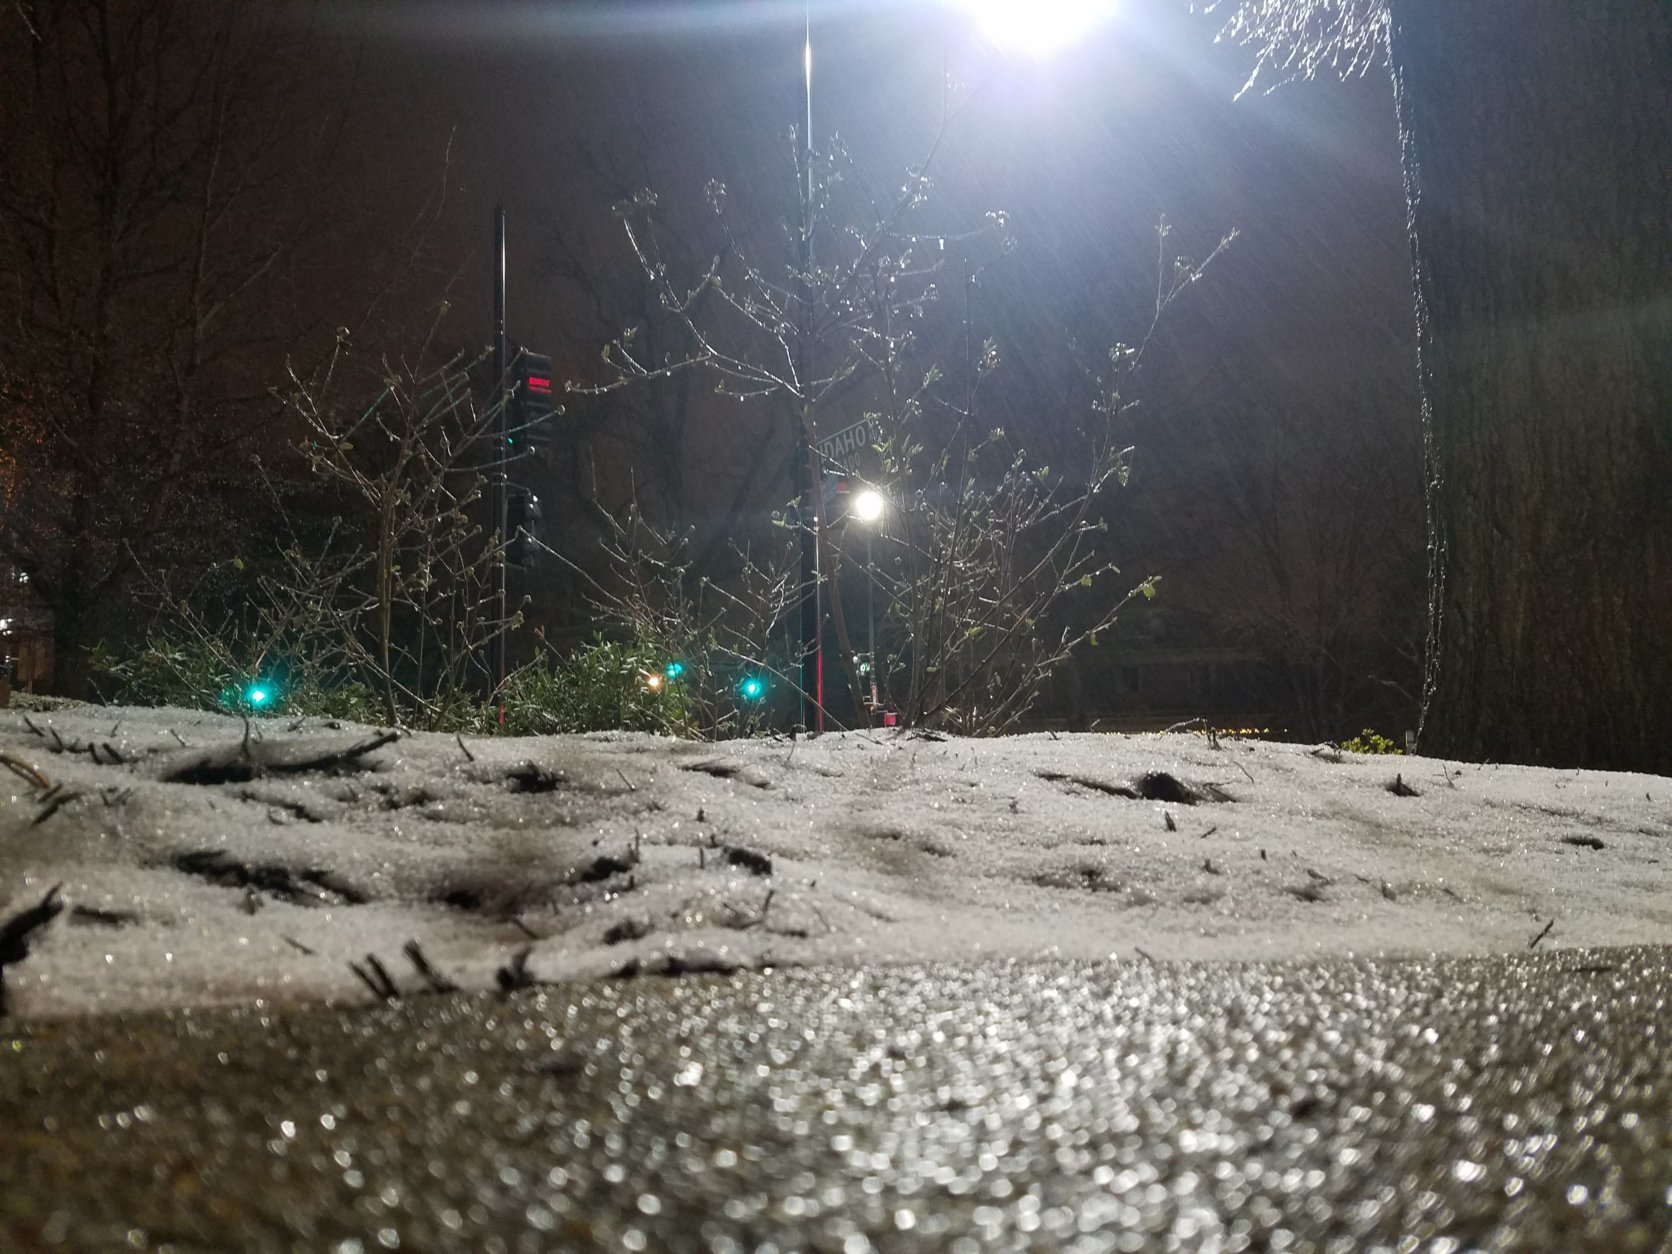 Snow and ice coat the ground in Northwest D.C. Wednesday, March 21. (WTOP/William Vitka)